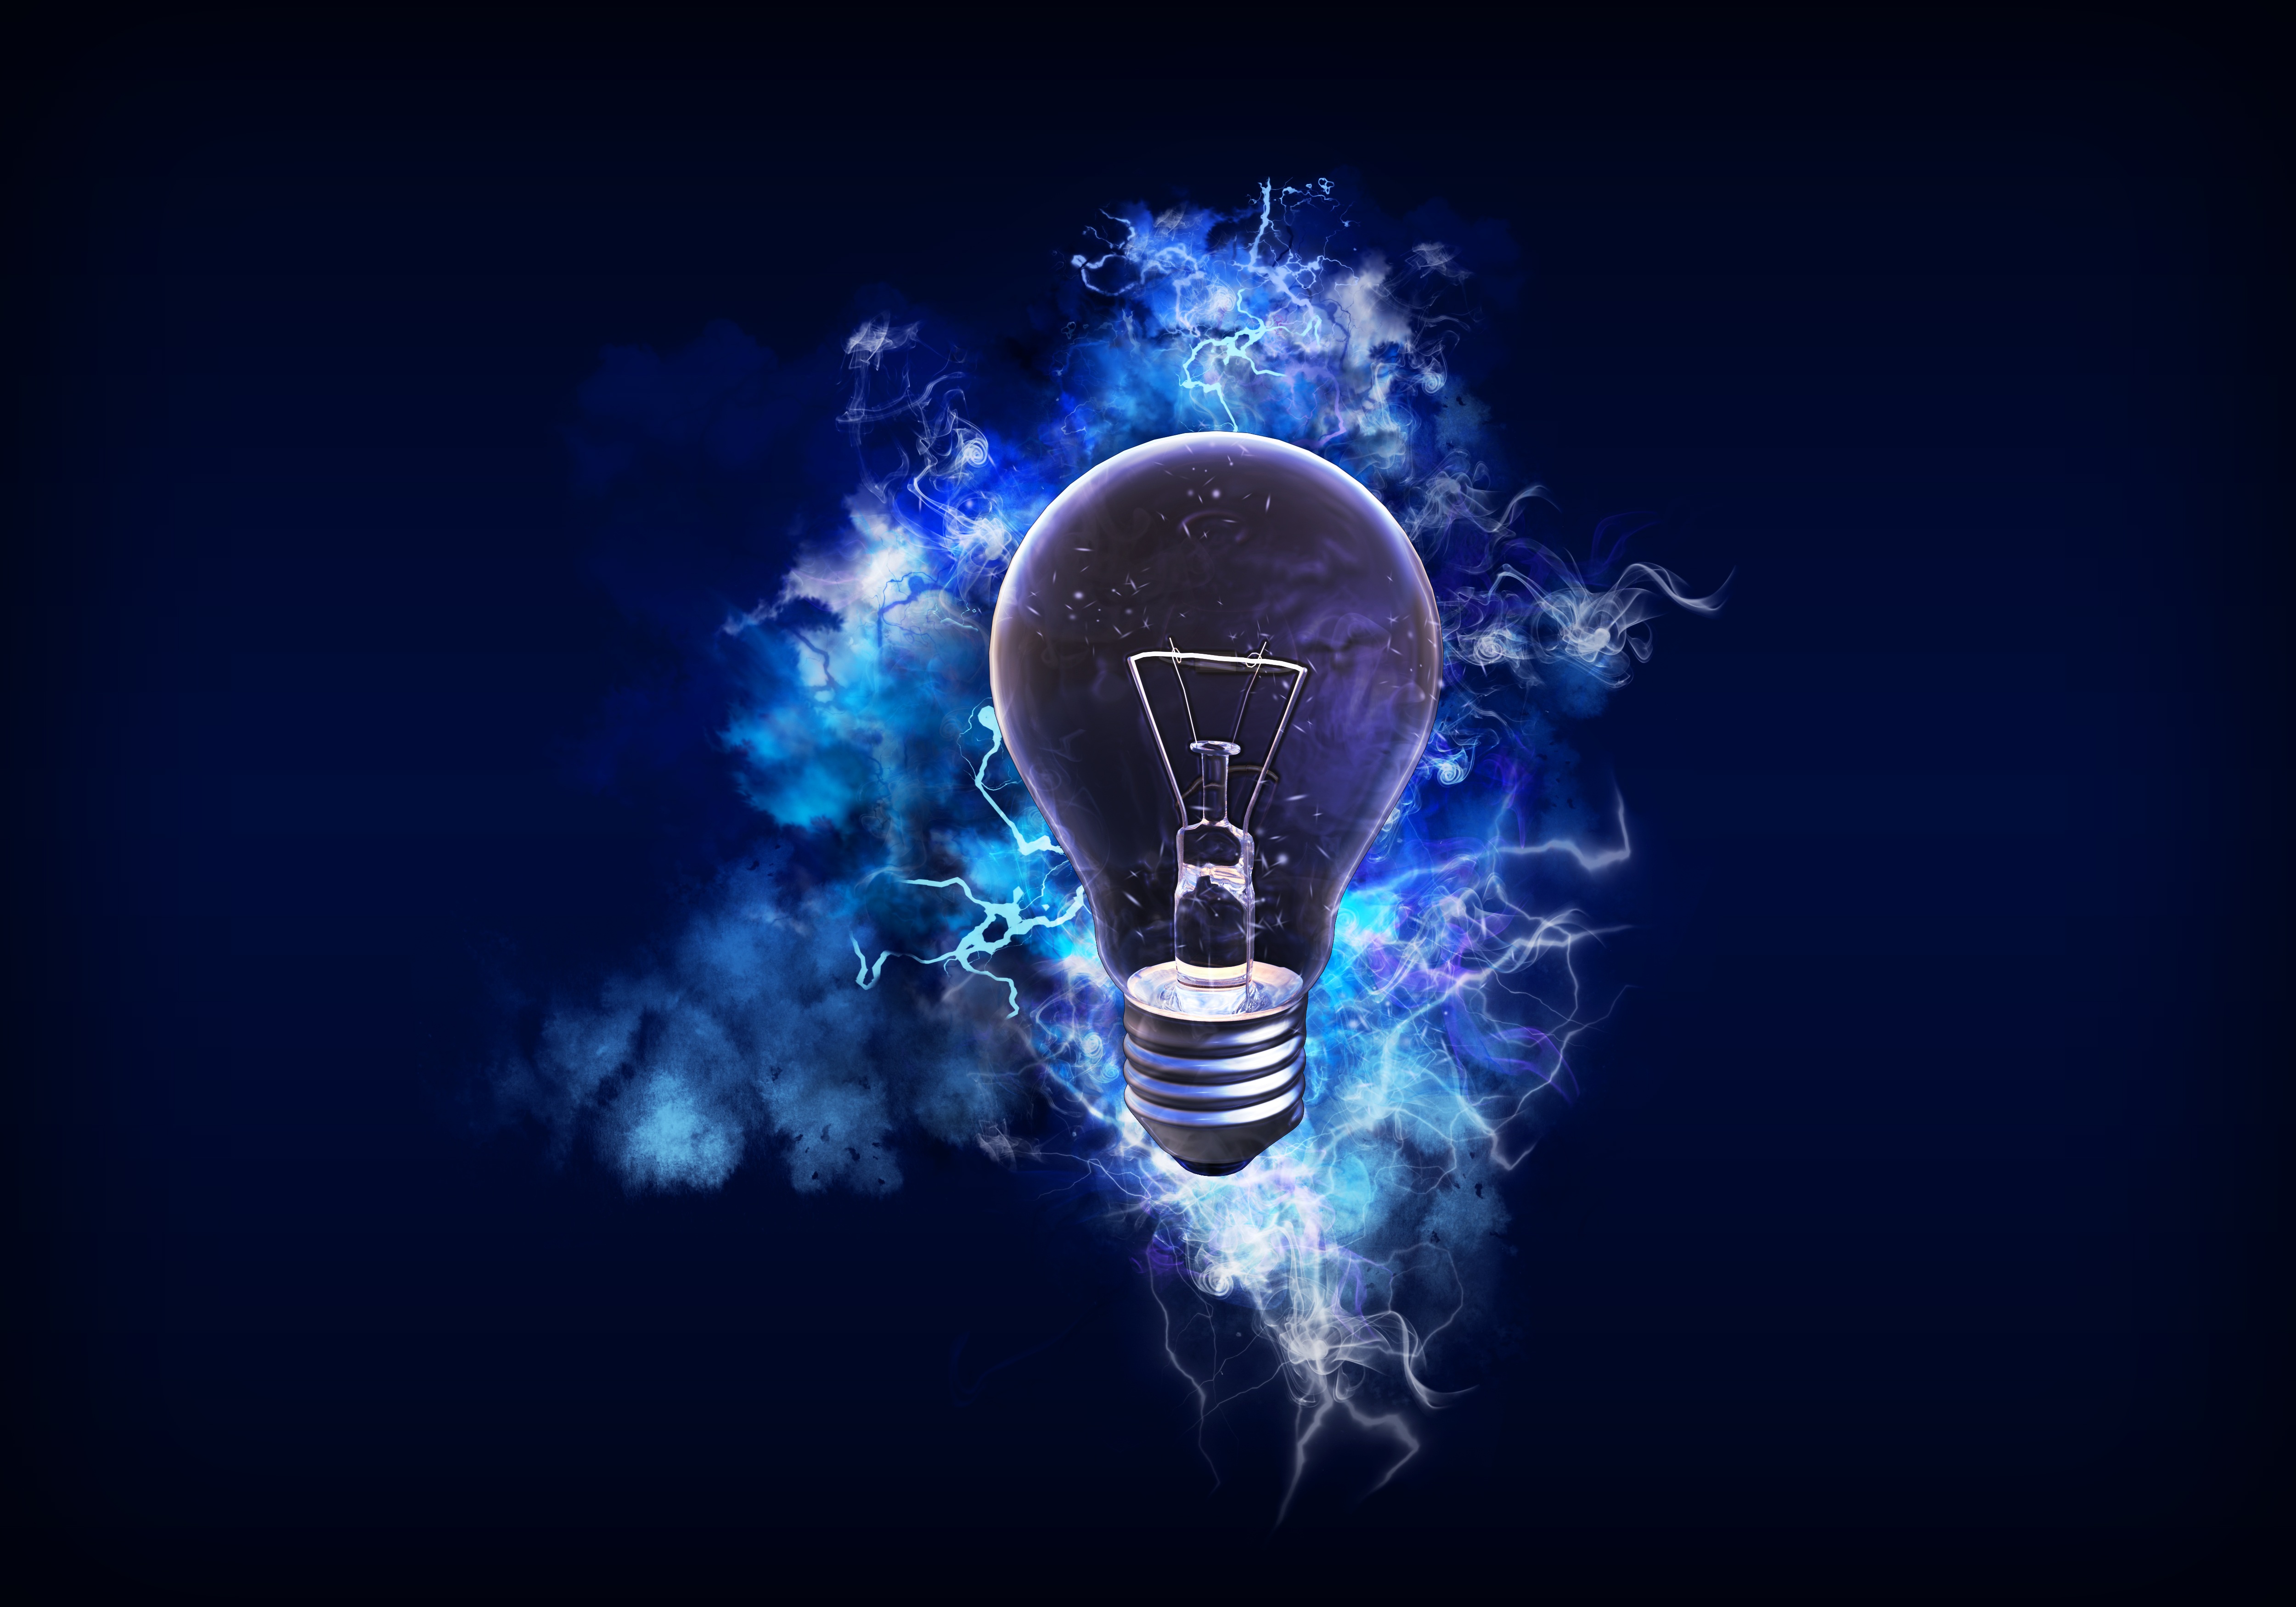 53207 download wallpaper shine, miscellaneous, light bulb, light, miscellanea, electricity, energy screensavers and pictures for free